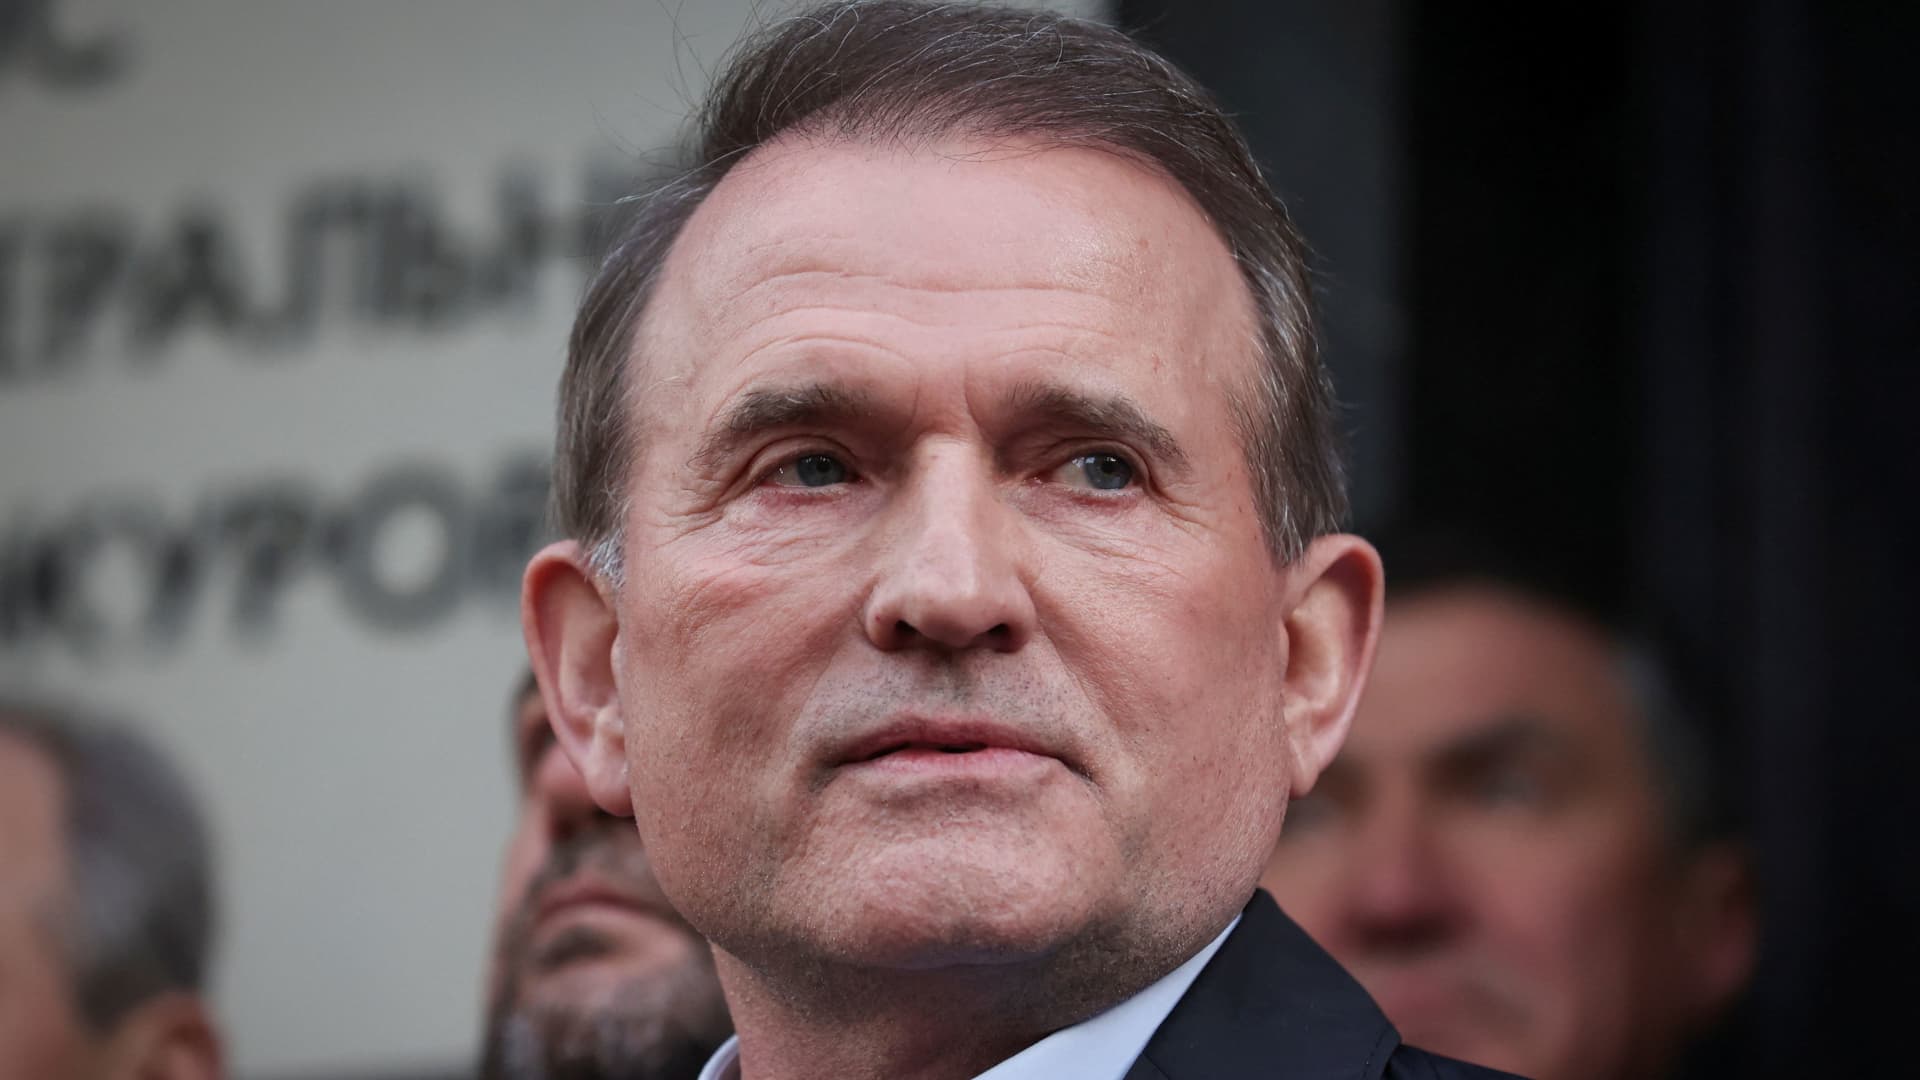 FILE PHOTO: Viktor Medvedchuk, leader of Opposition Platform - For Life political party, speaks with journalists outside the office of the Prosecutor General in Kyiv, Ukraine May 12, 2021. REUTERS/Serhii Nuzhnenko/File Photo